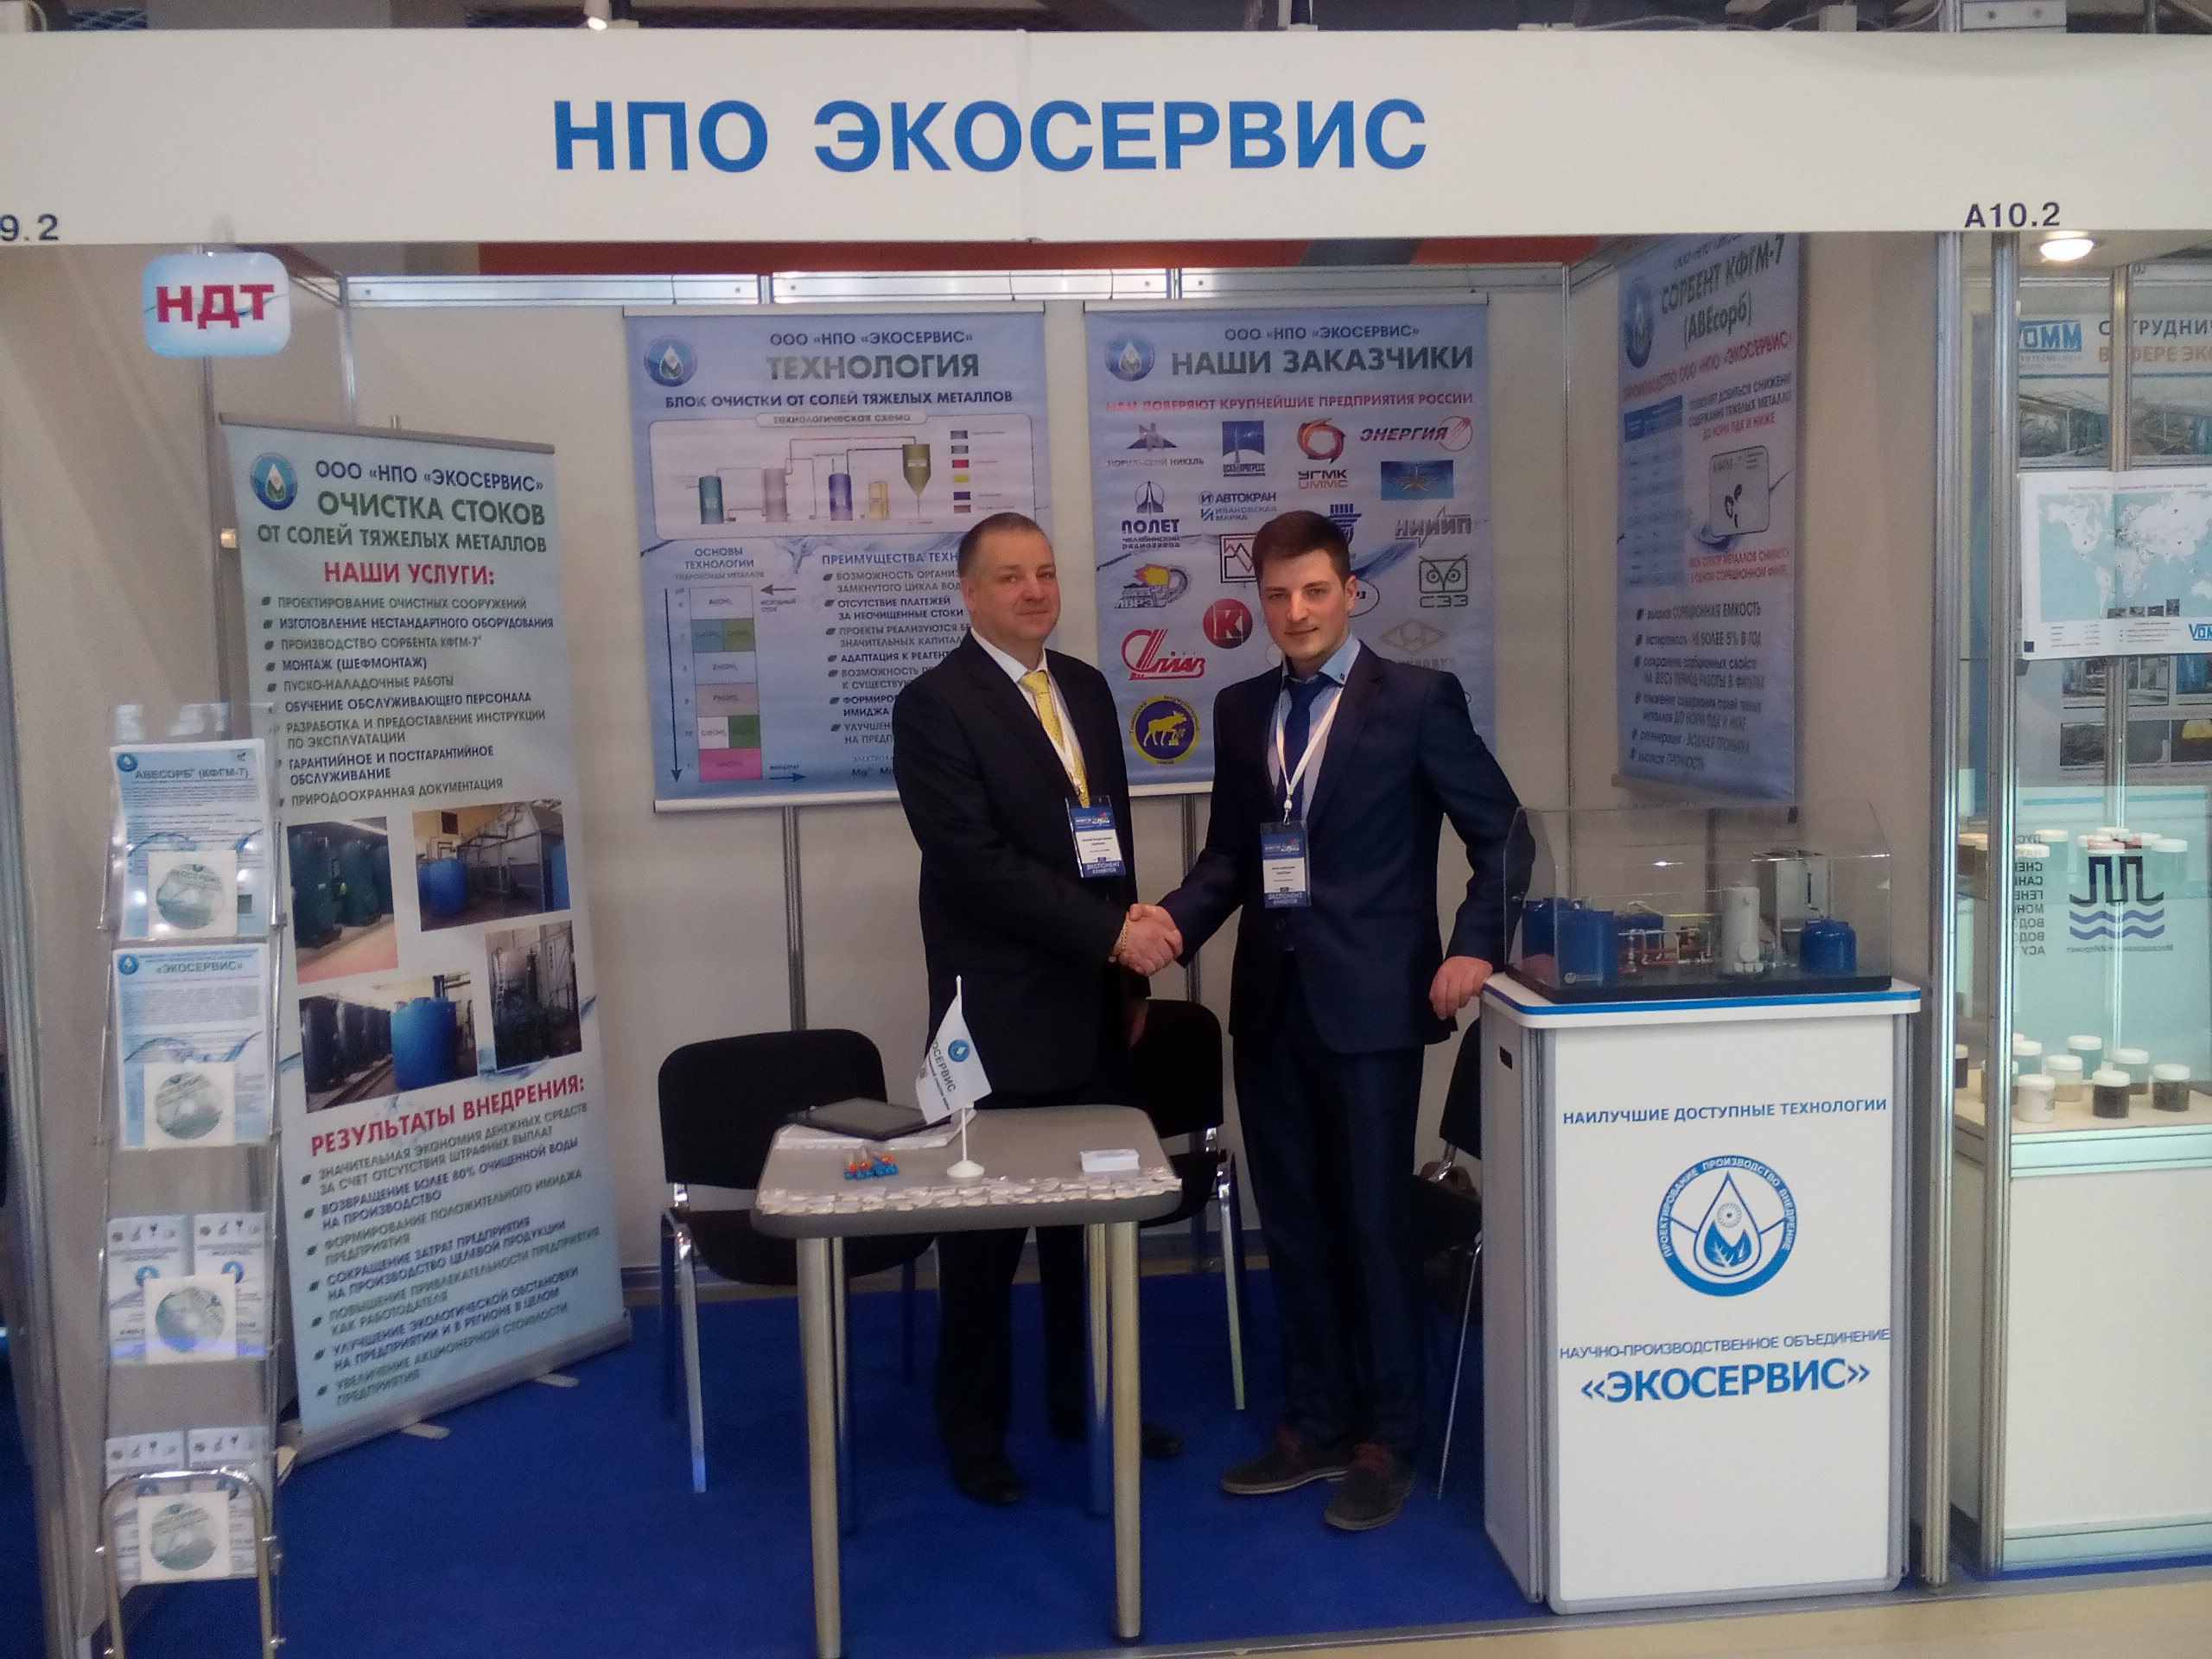 Read more: WE HAVE PARTICIPATED IN THE EXHIBITION 